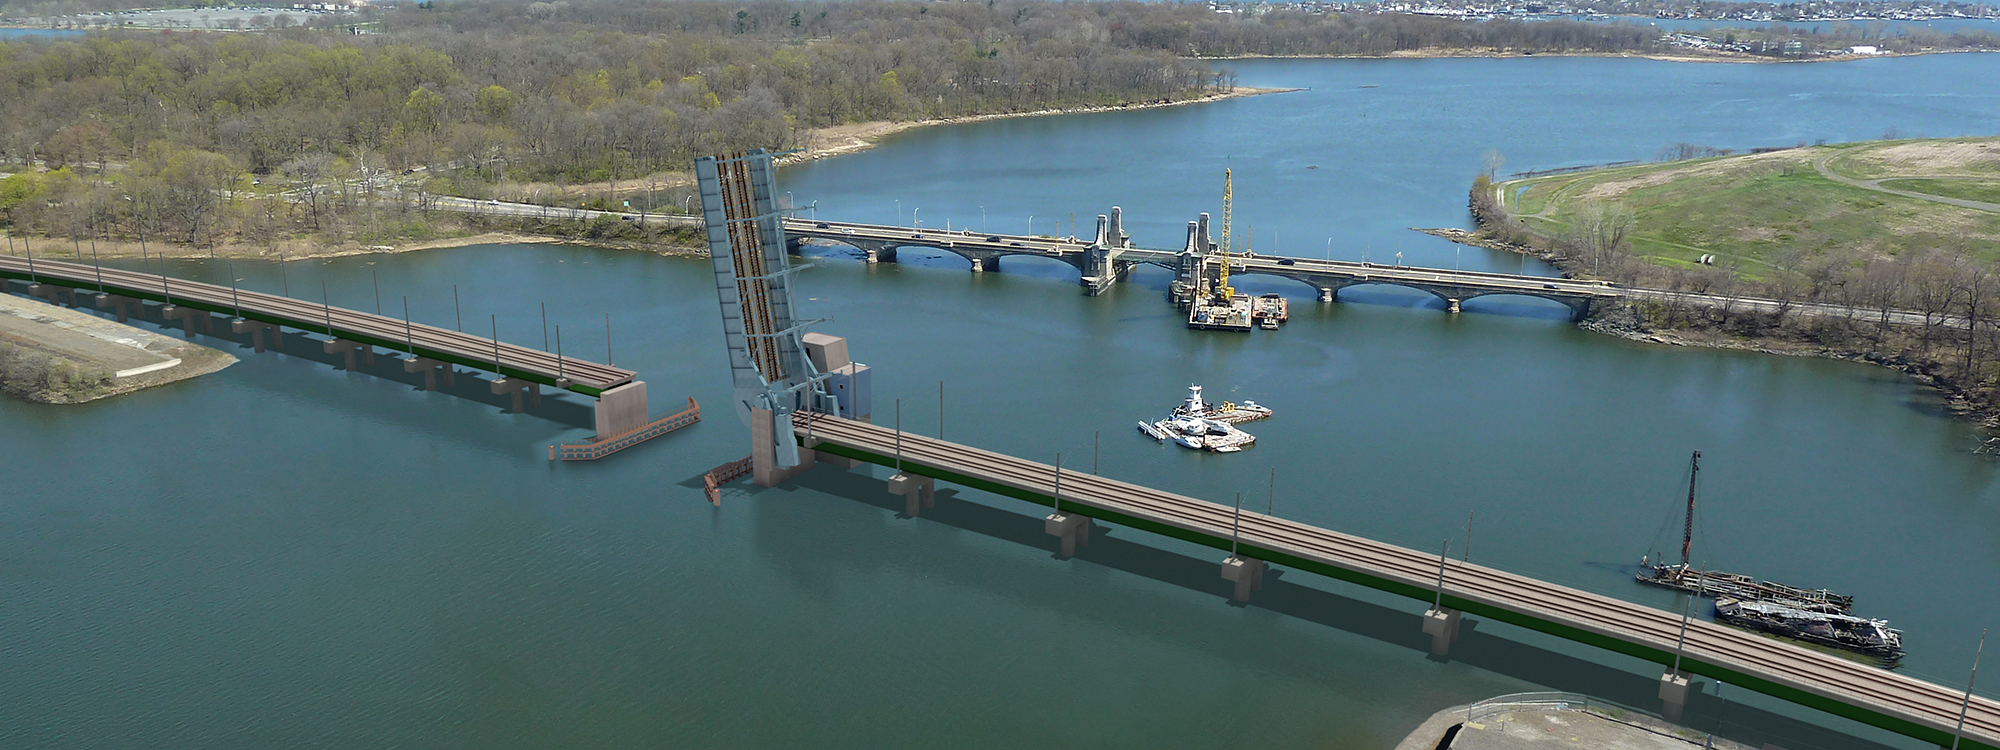 A section of the Pelham Bay Bridge is raised for a passing vessel.